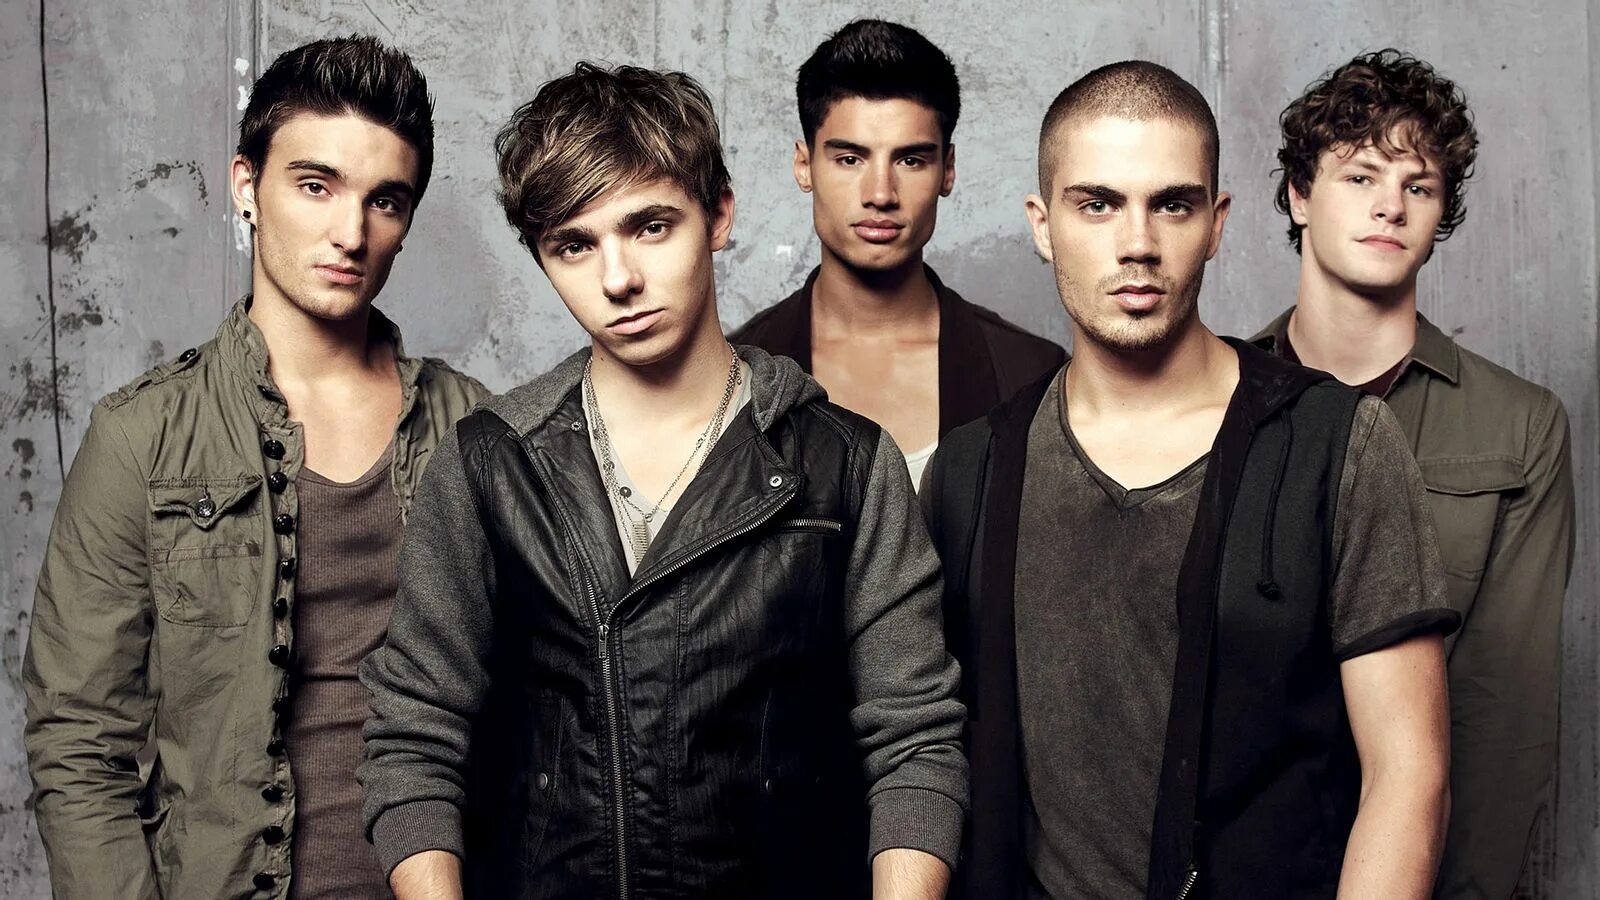 Группа the wanted. Want. Wanted 2022. Группа the wanted 2019. И т д данная группа